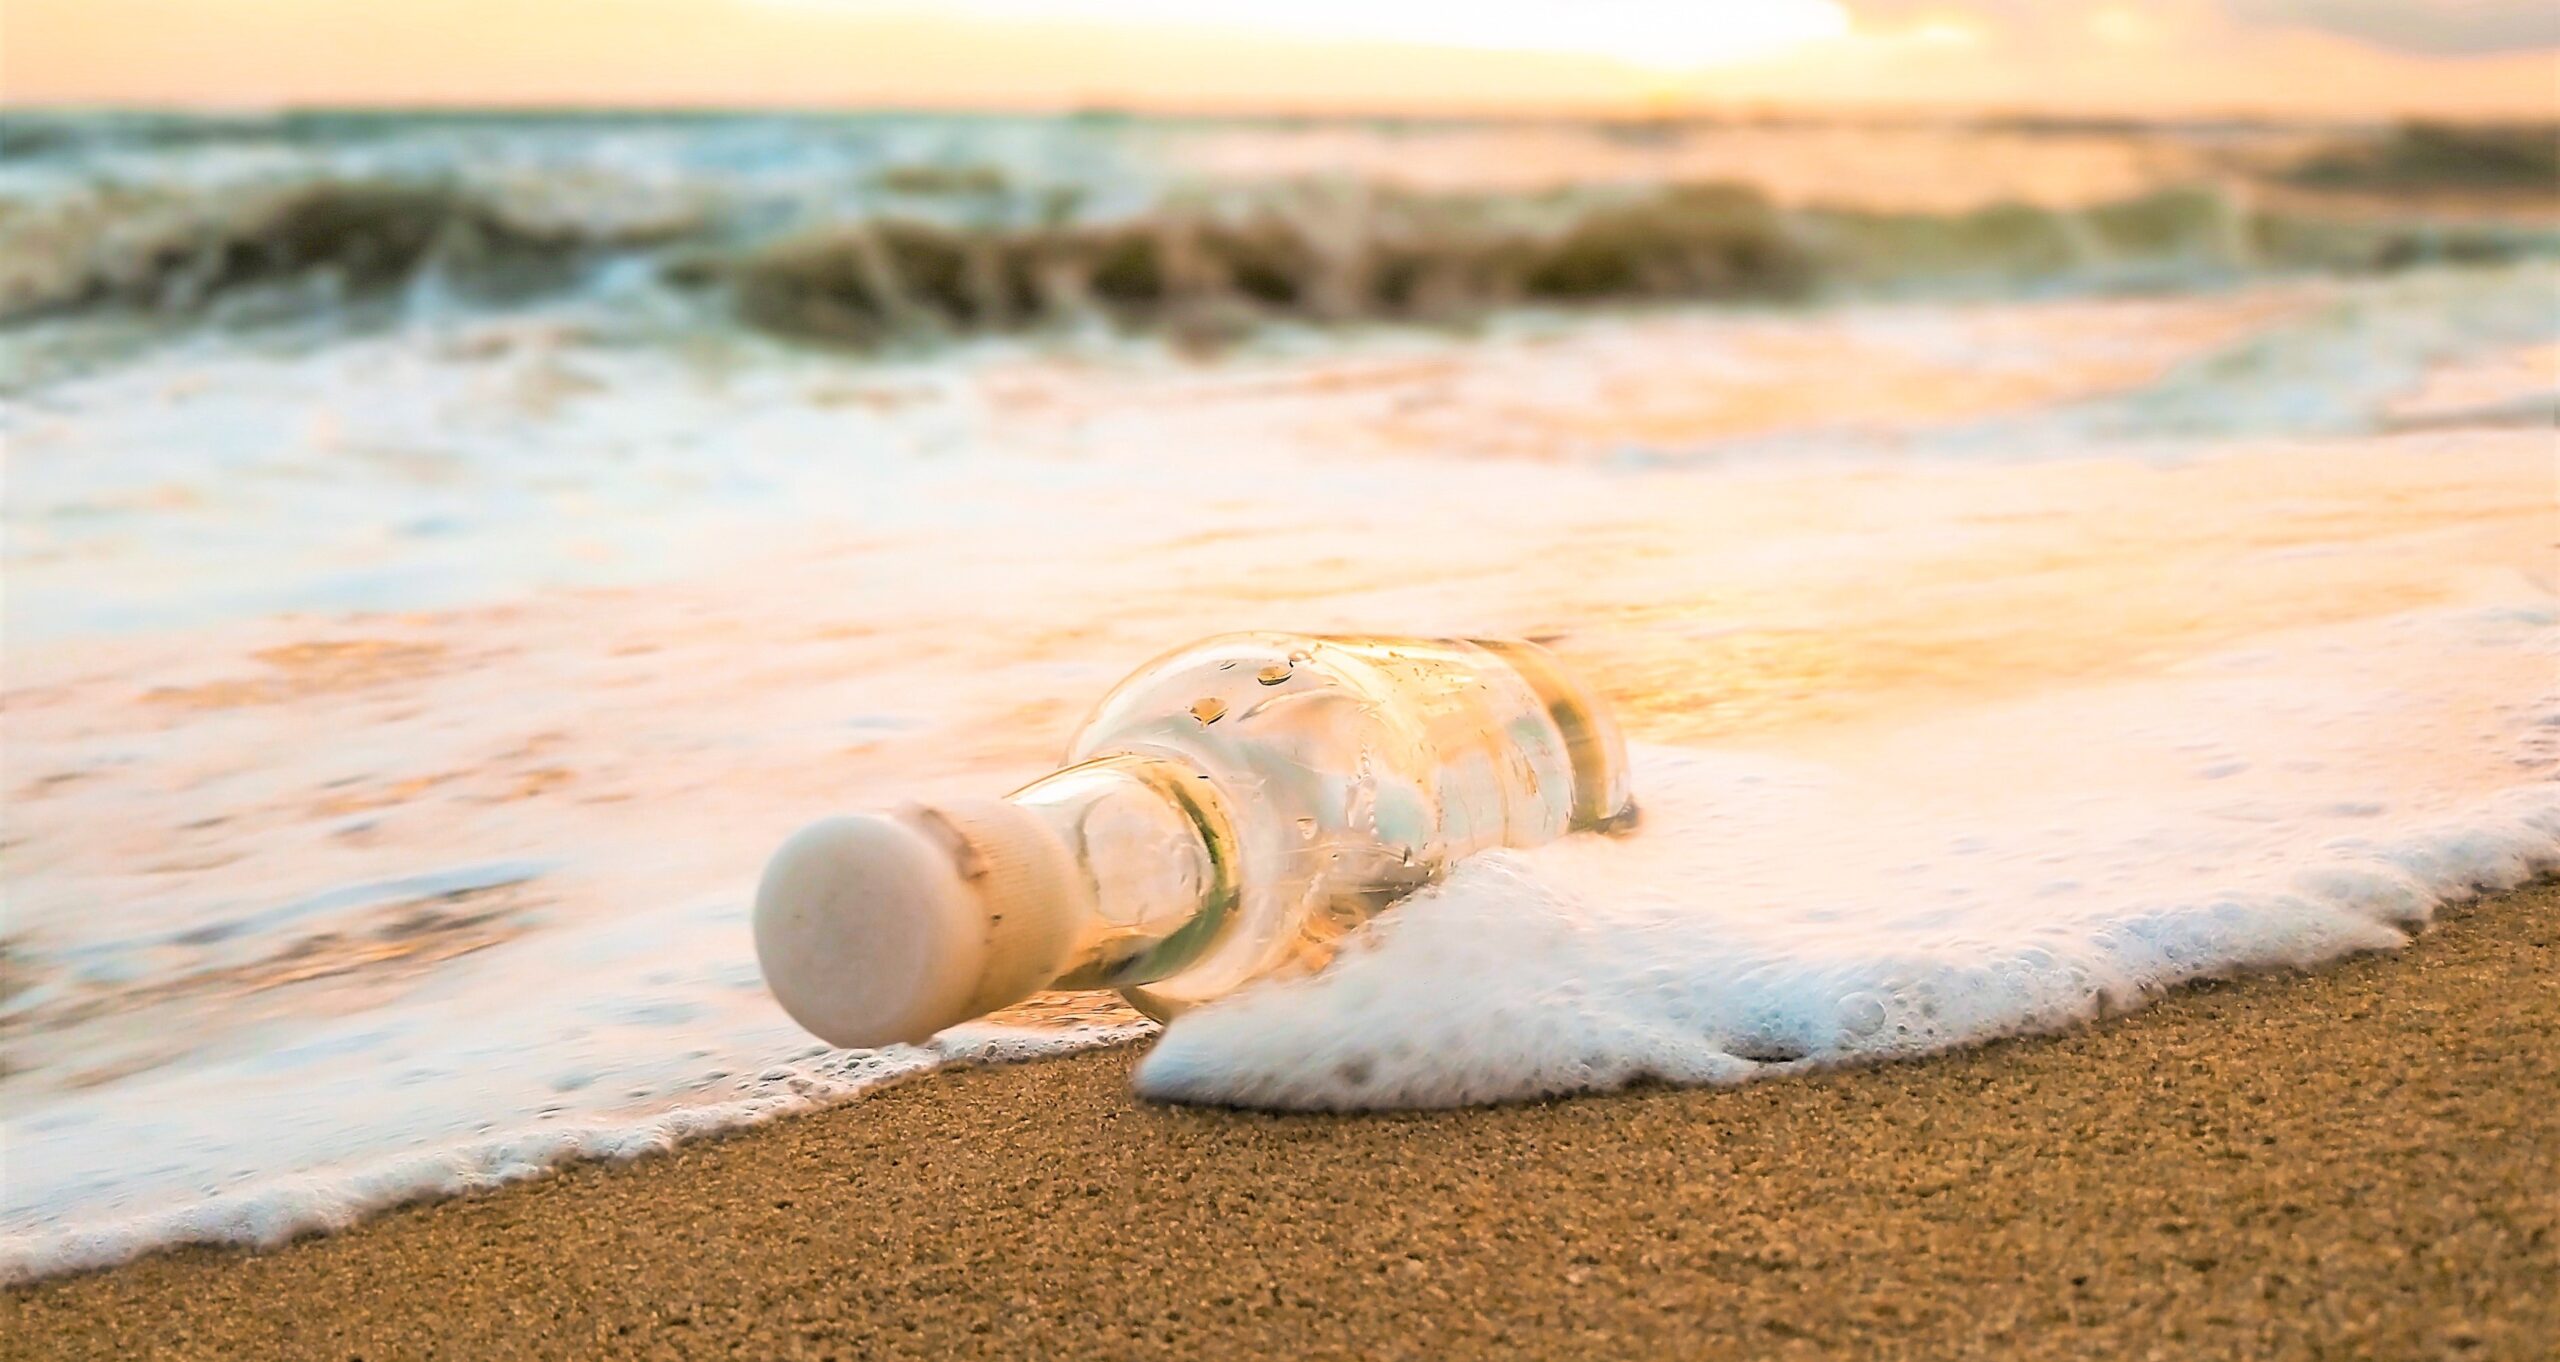 A bottle with a message inside has been washed ashore, laying on the sandy beach.